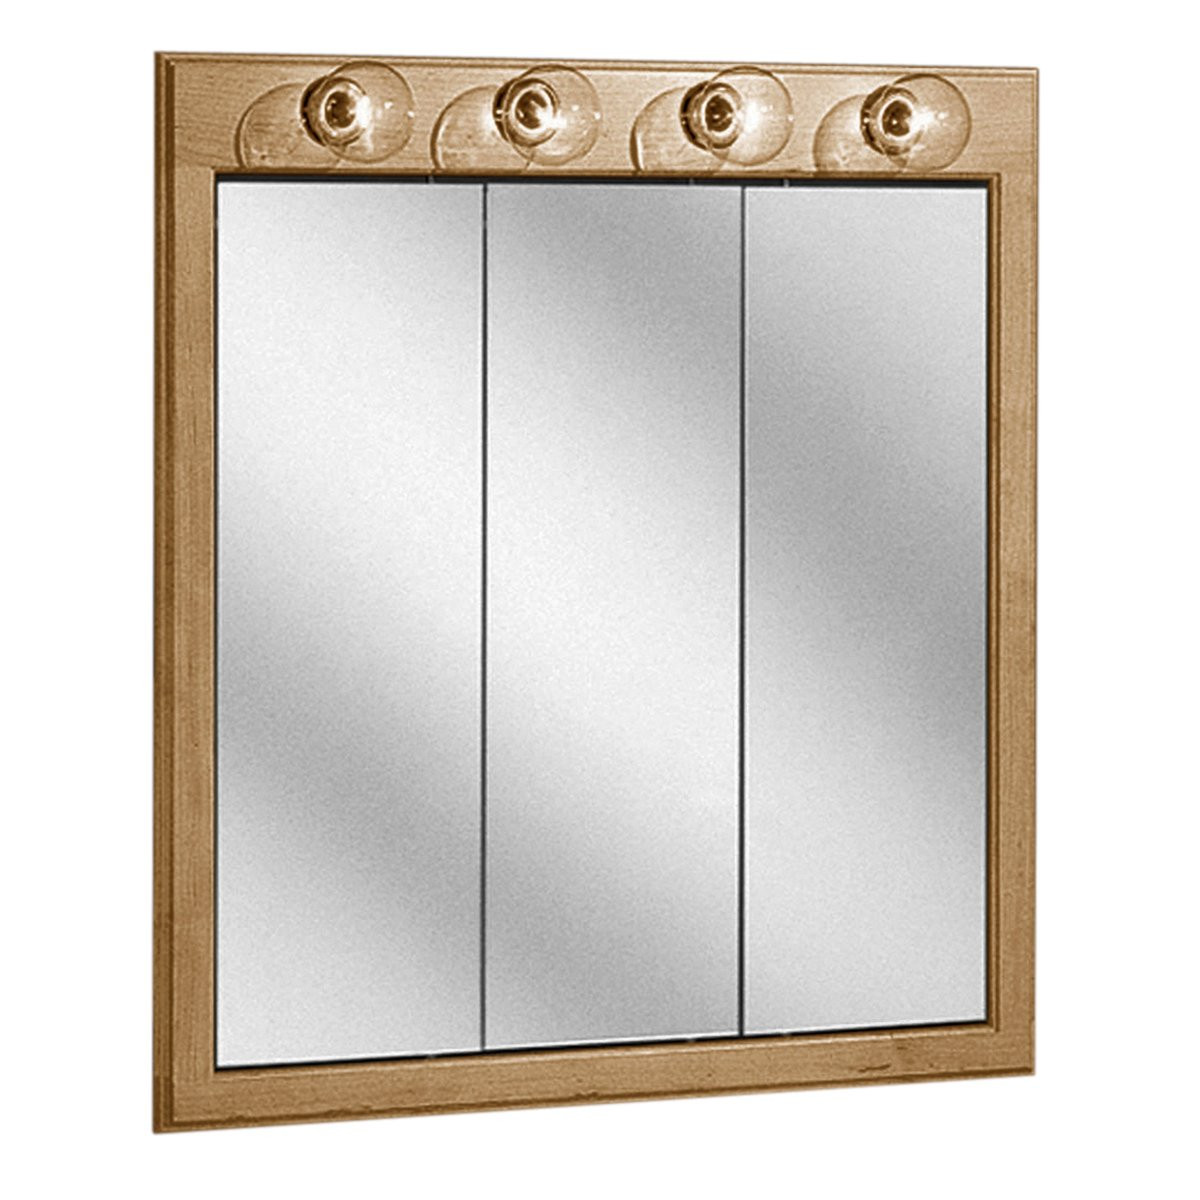 Home Depot Bathroom Mirrors Cabinets
 Lighted medicine cabinet replacement for medicine cabinet